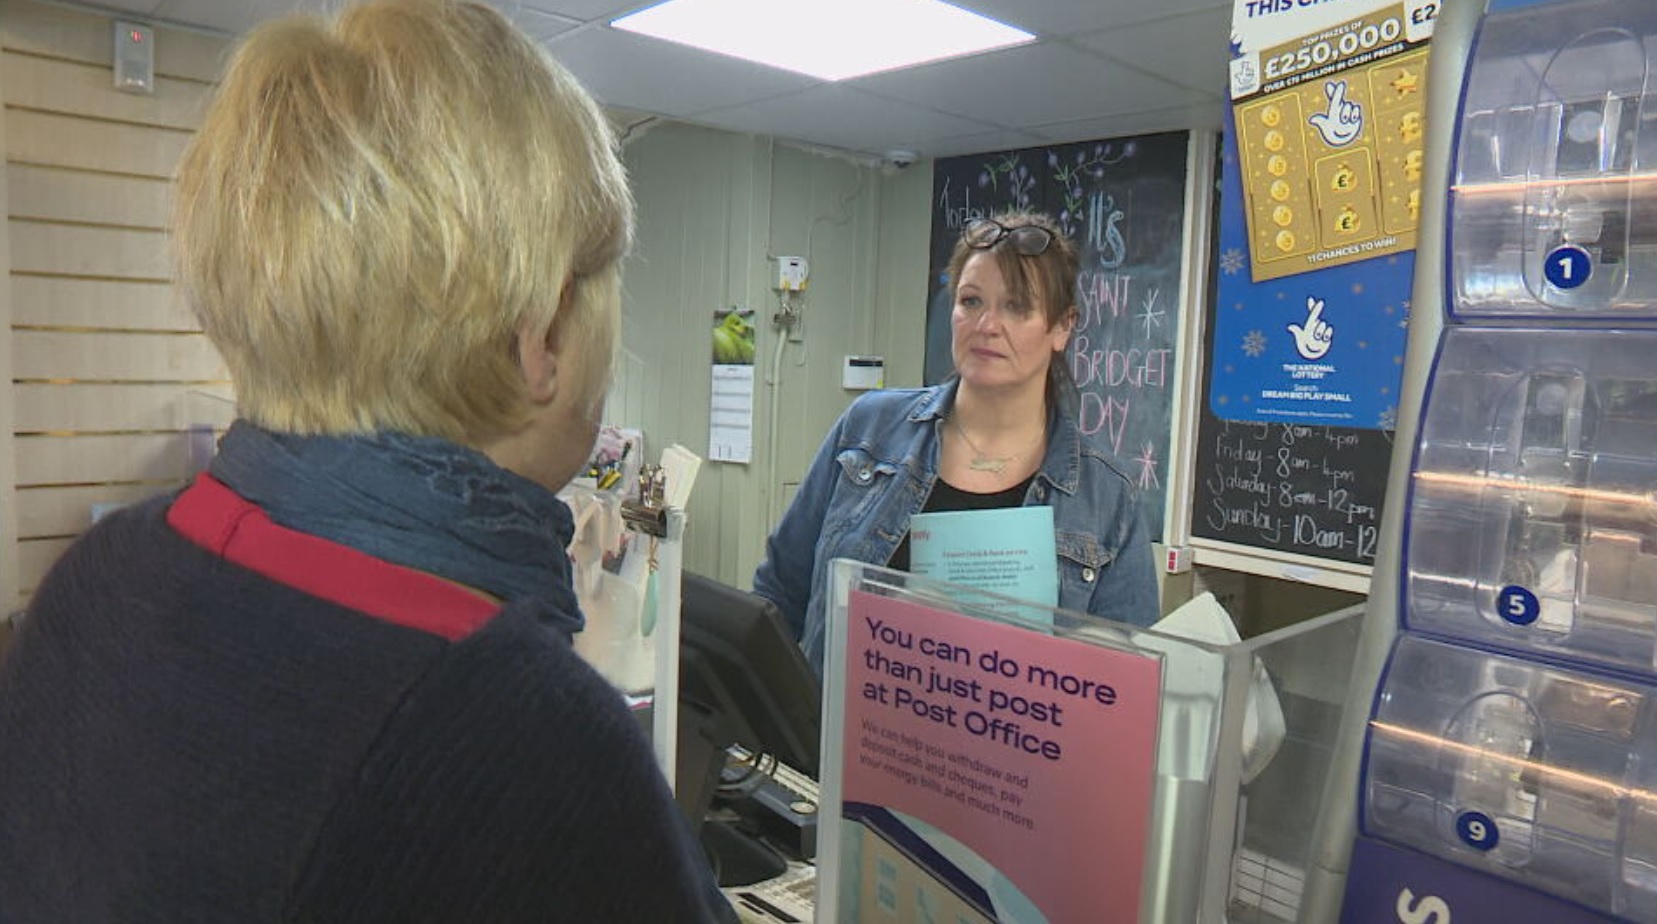 Marlene's post office in Cromrie was on the brink of financial collapse two weeks ago